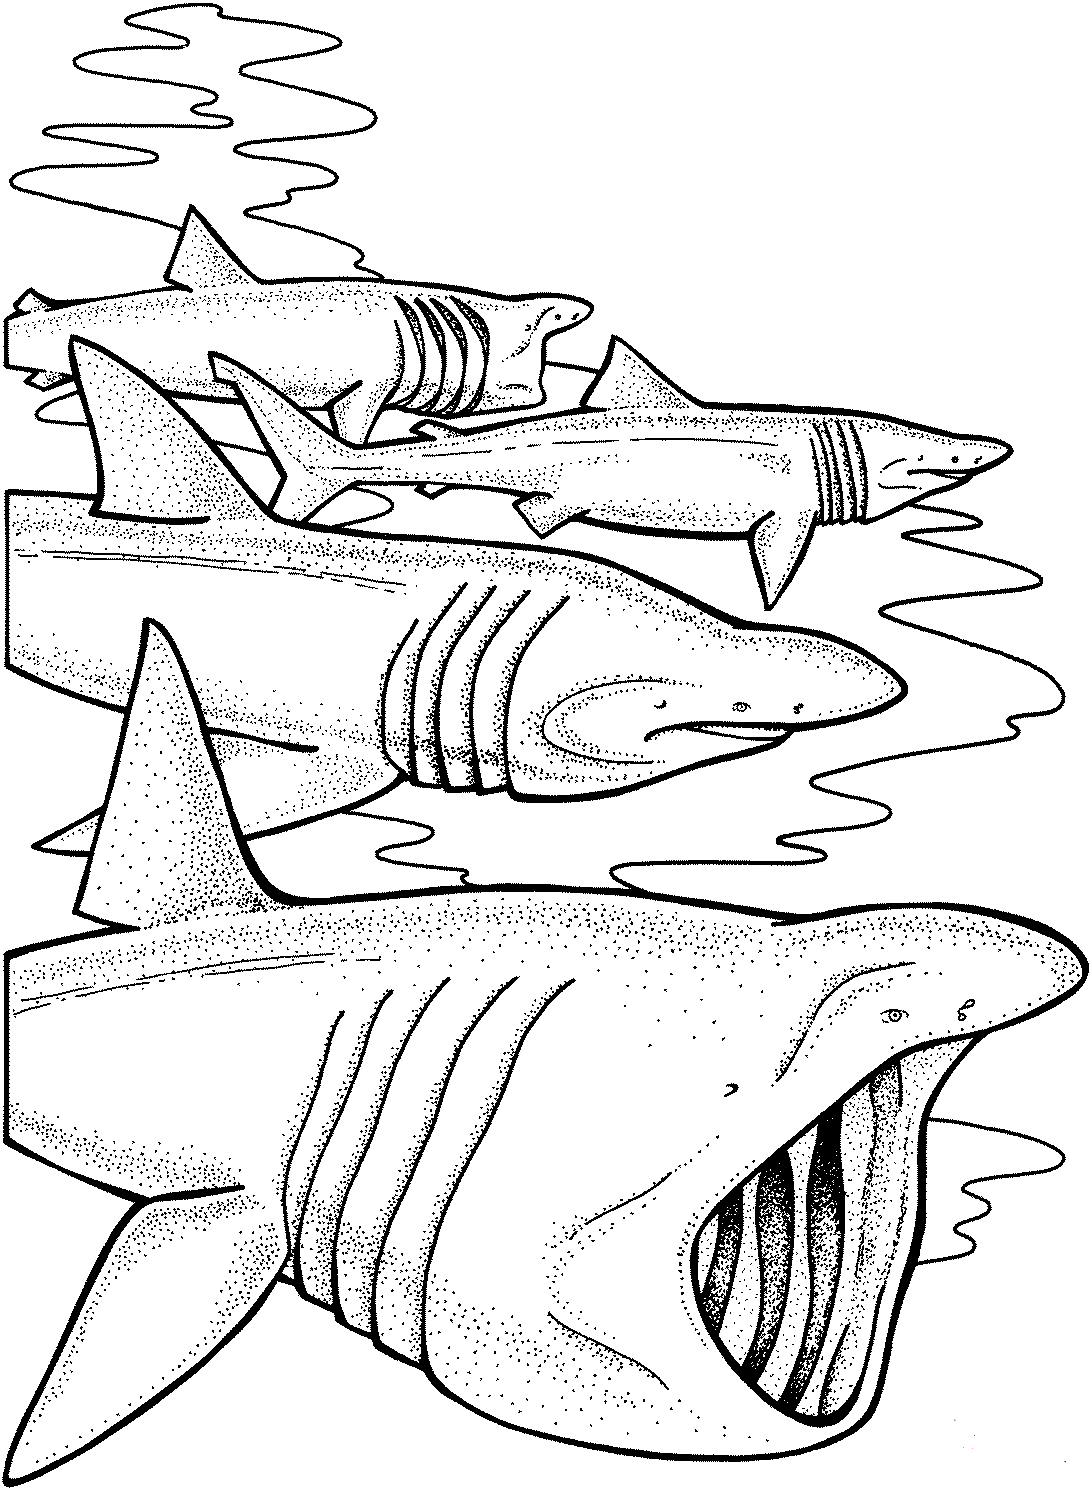 Basking Sharks Coloring Page